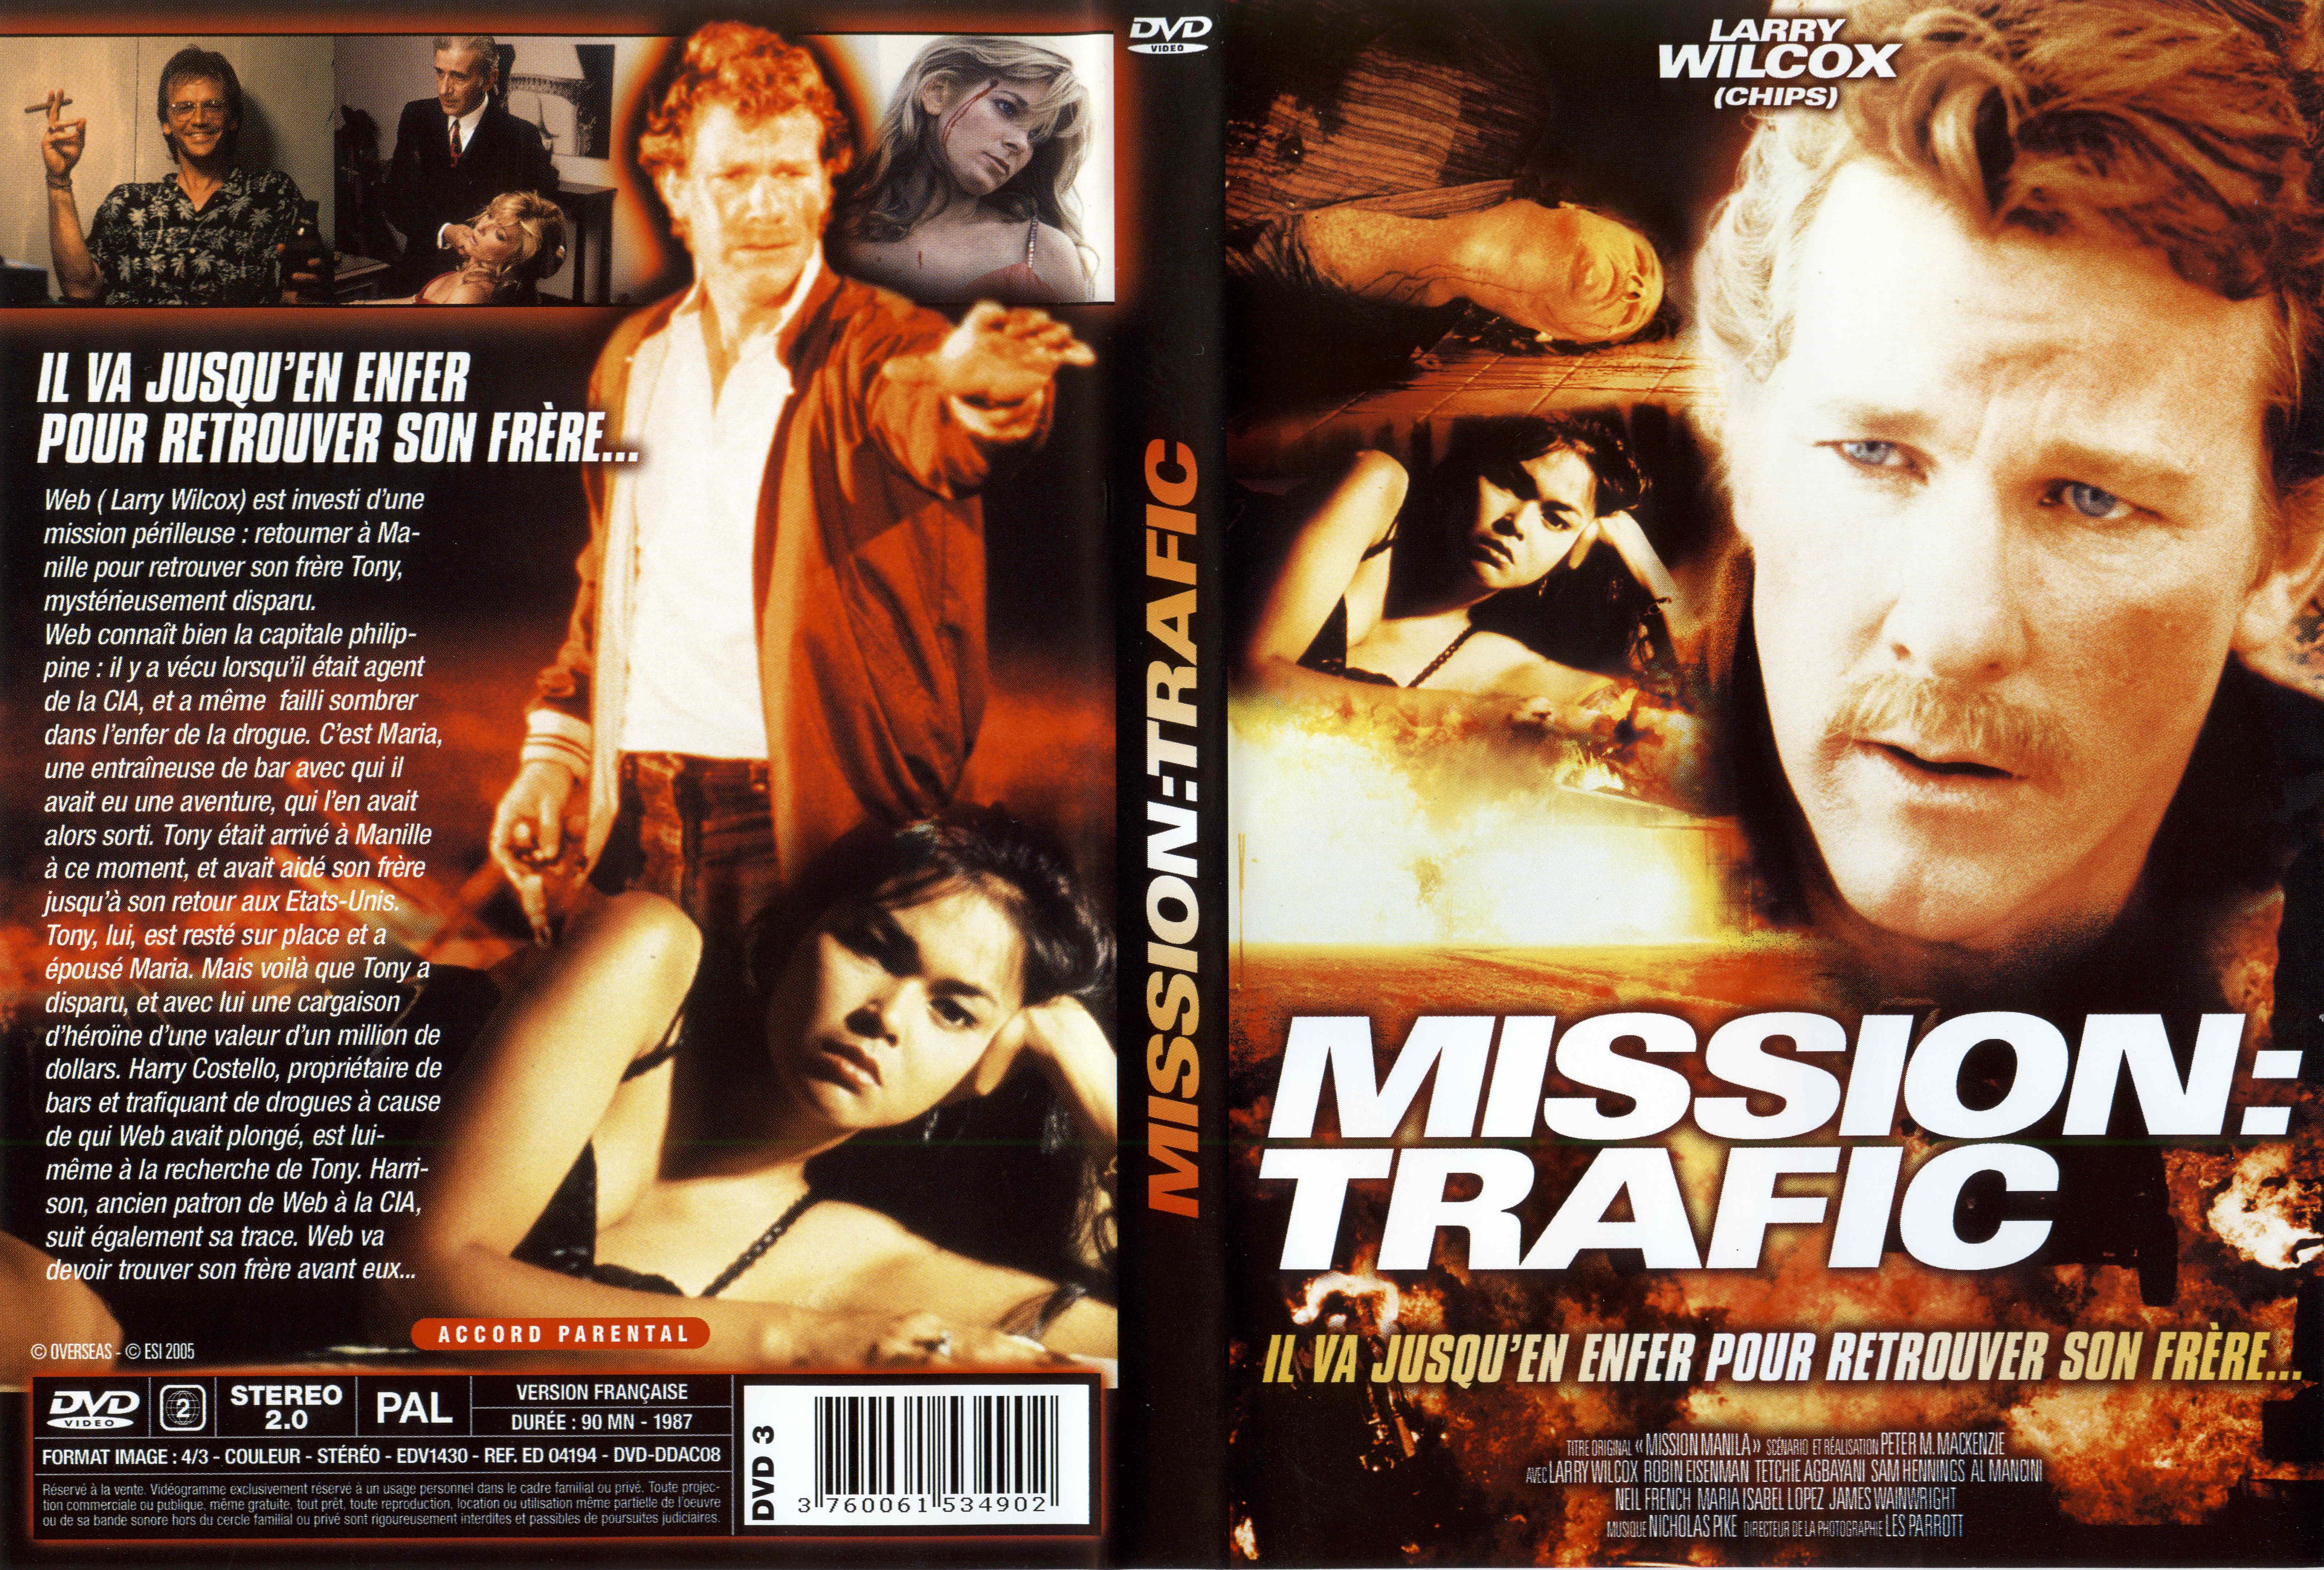 Jaquette DVD Mission trafic